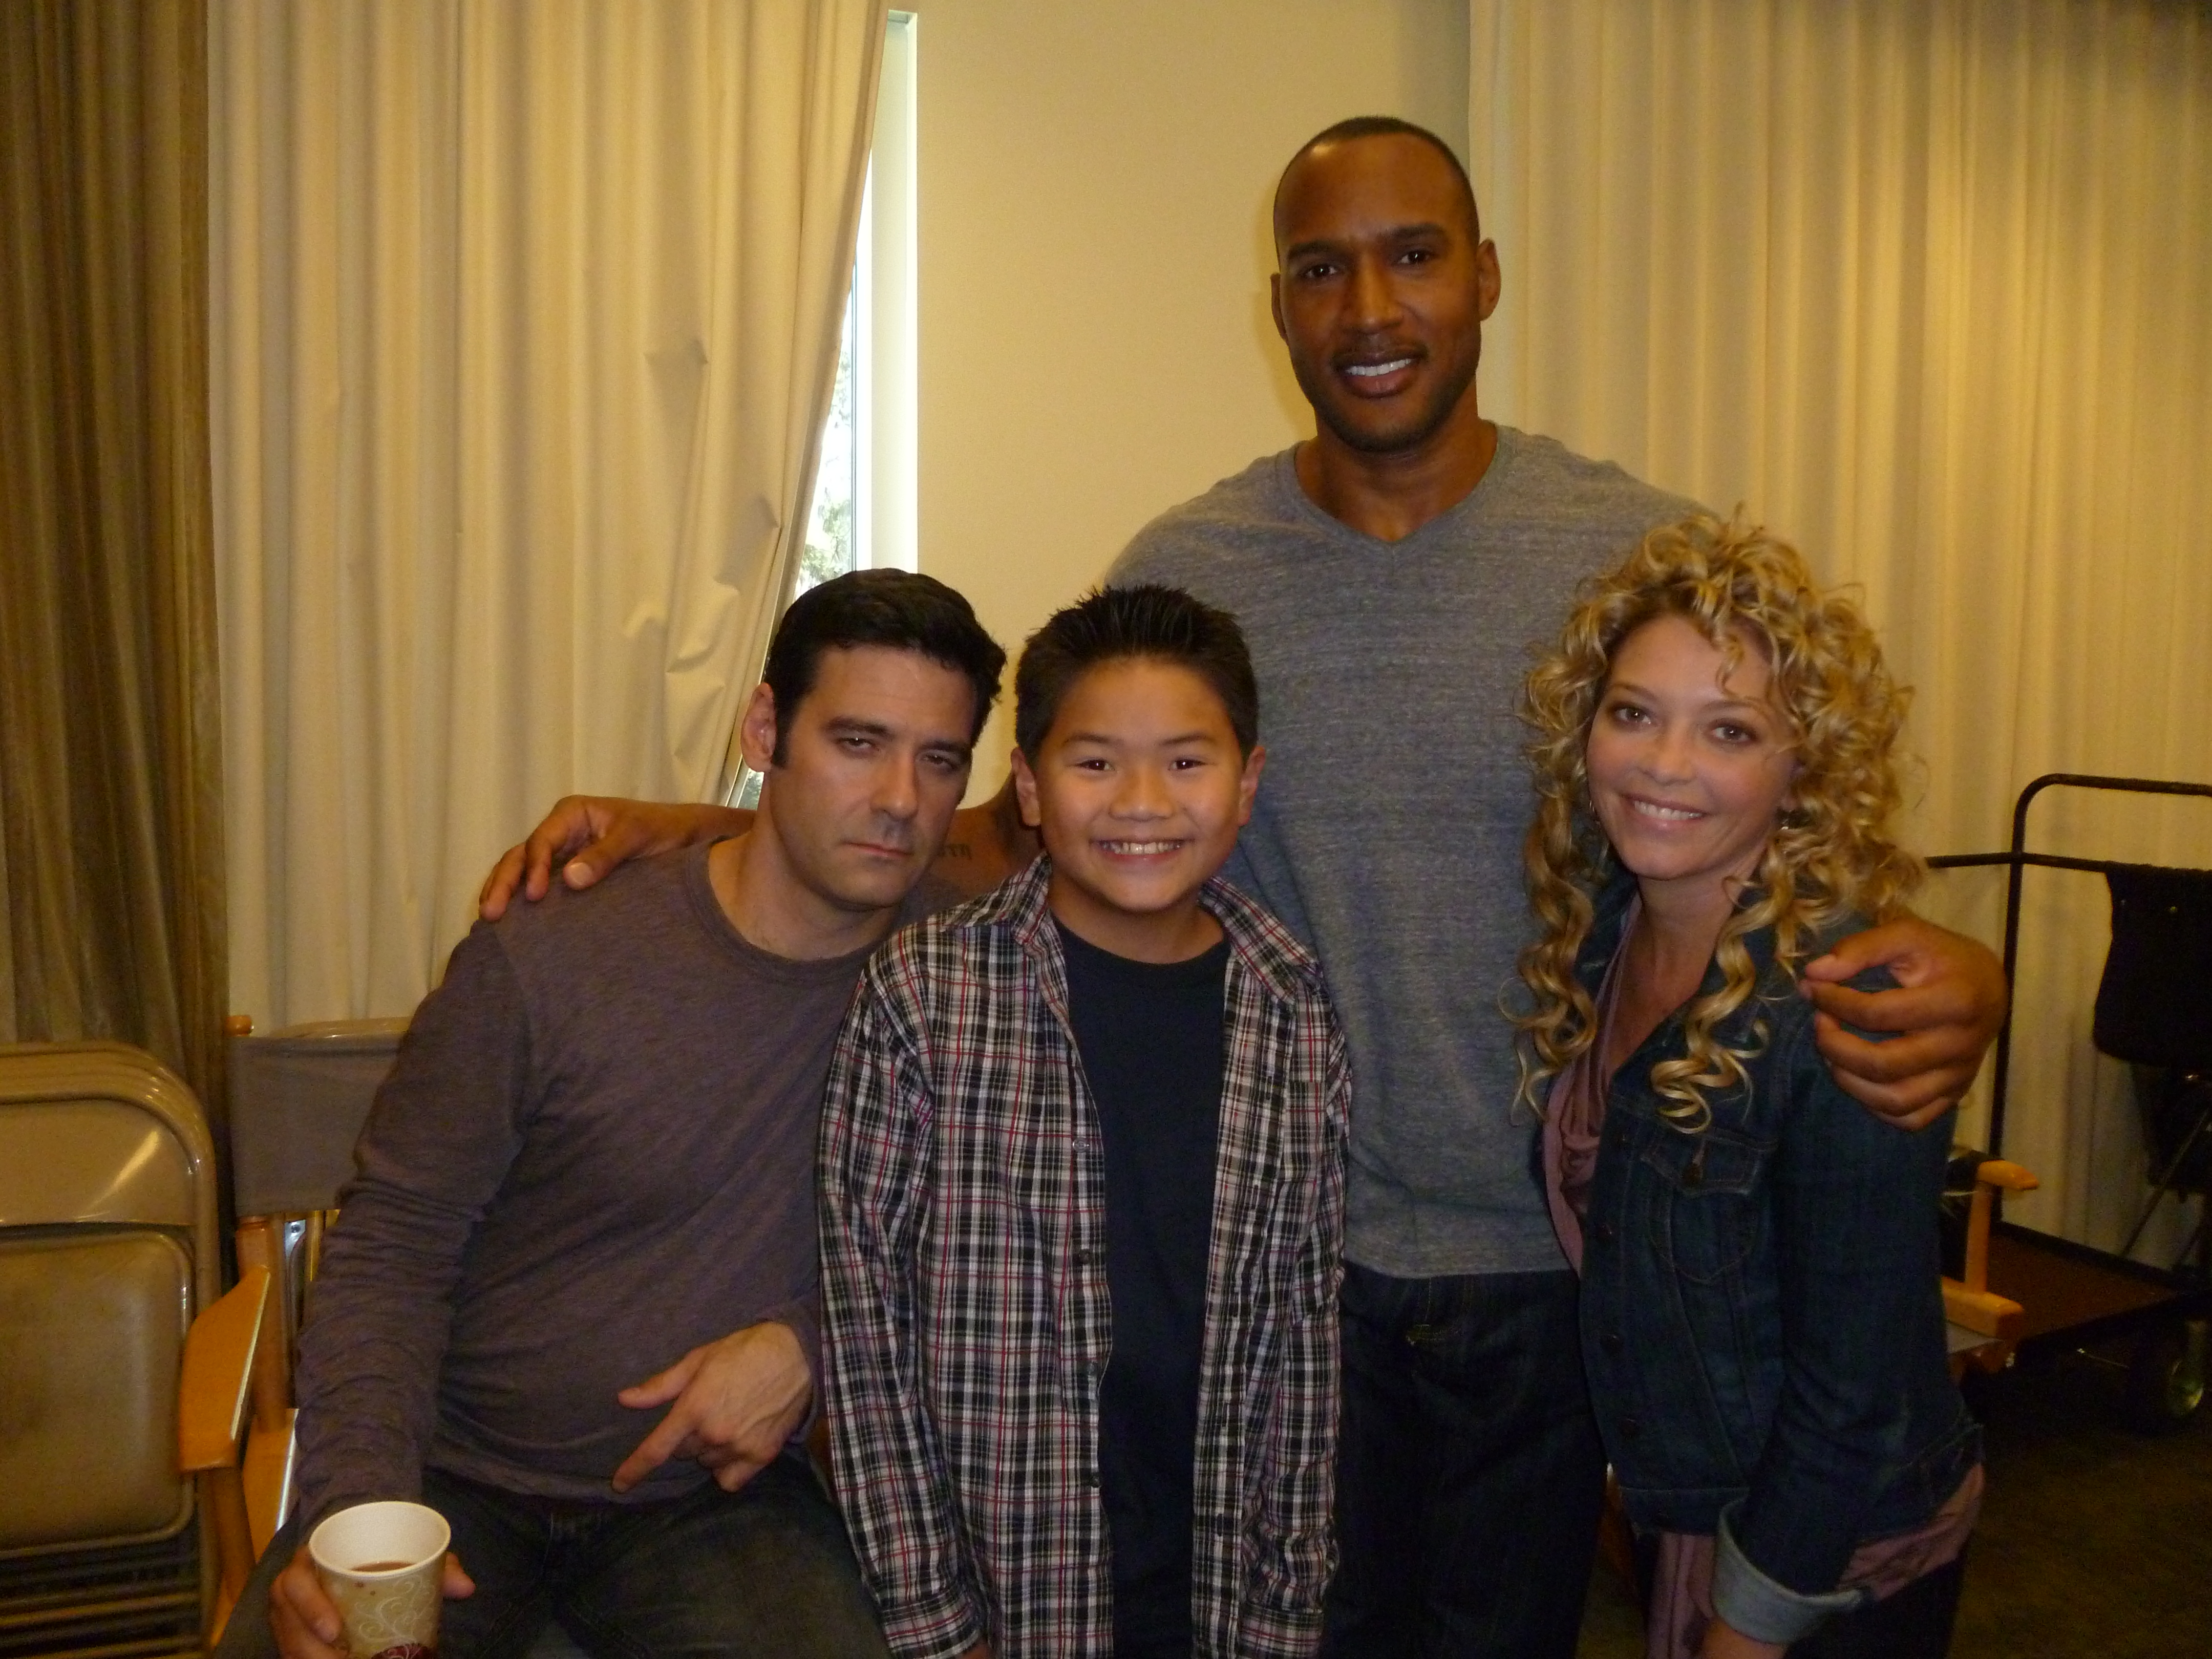 On set with Man Up! Cast Mather Zickel, Henry Simmons, and Amanda Detmer.